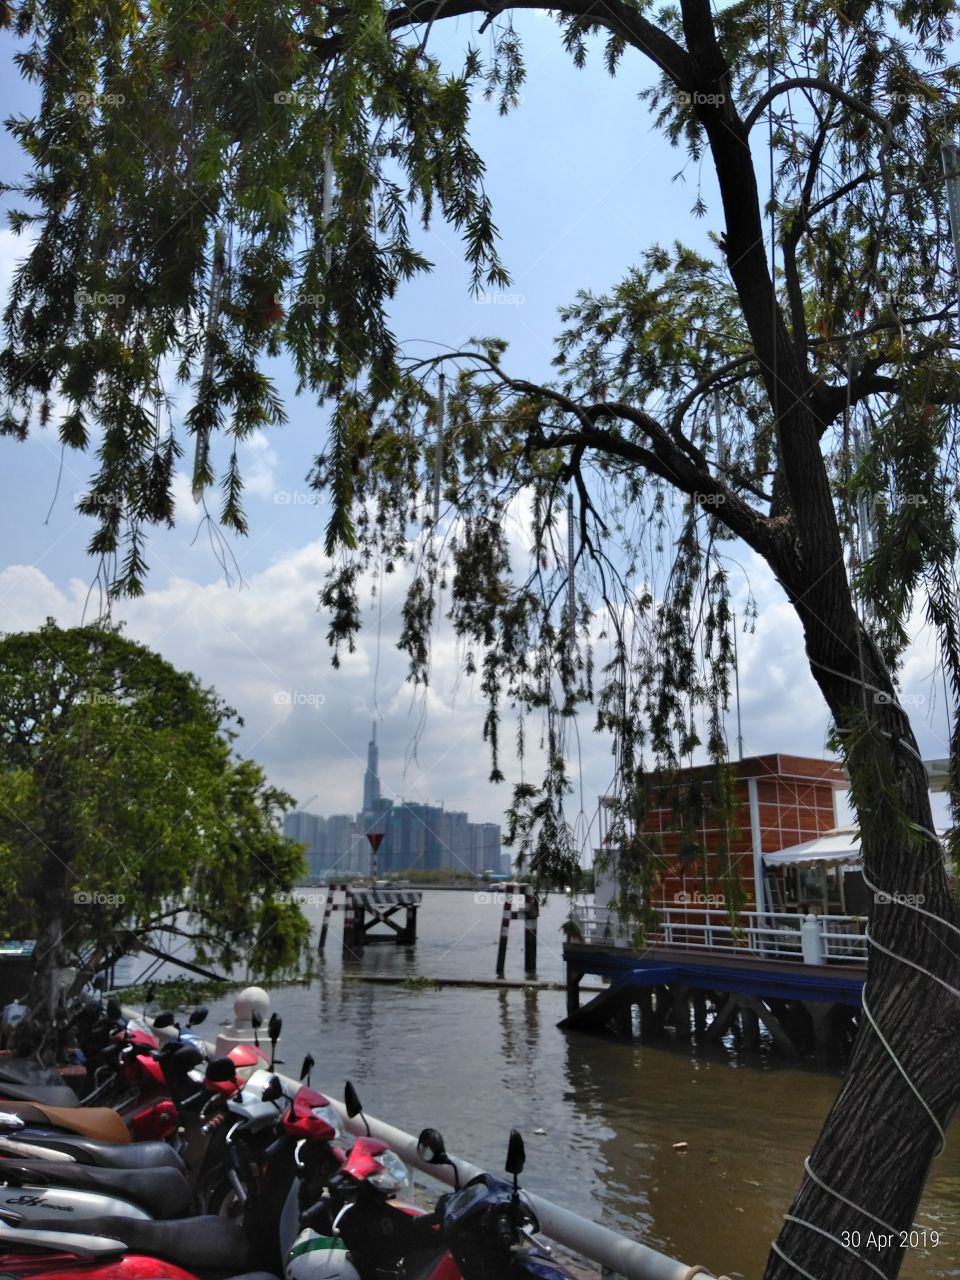 Typical riverside scene in Ho Chi Minh City